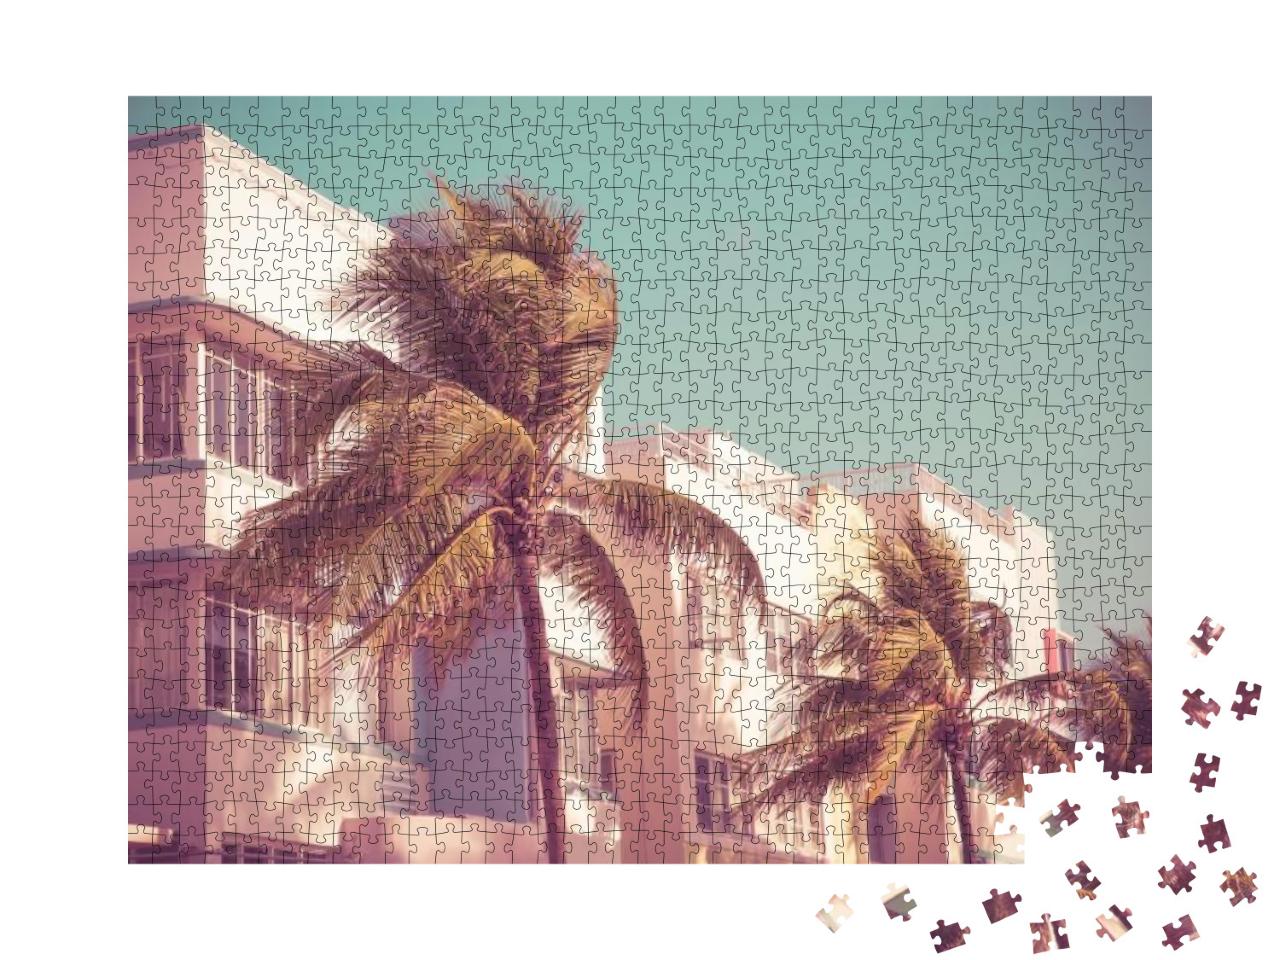 Vintage Tone Image of Palm Trees & Typical Retro Art Deco... Jigsaw Puzzle with 1000 pieces